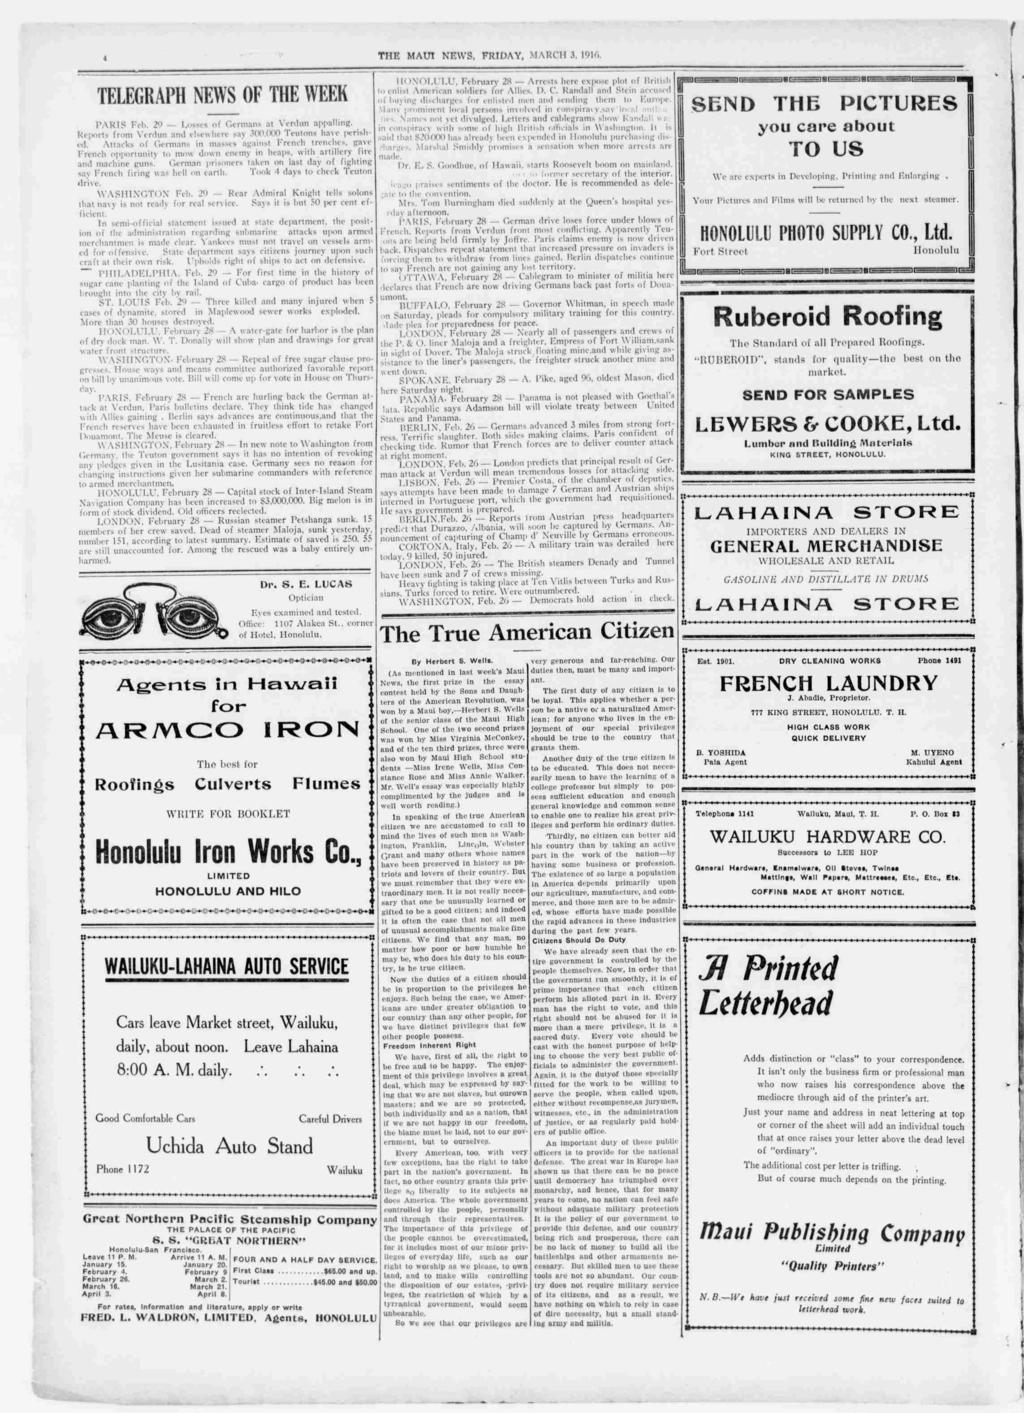 4 THE MAU NEWS, FRDAY, MARCH 3, 1916. TELEGRAPH NEWS OF THE WEEK TARTS Feb. 29 Losses of Germans at Verdun appallng. Reports from Verdun and elsewhere say 300.000 Teutons have pershed.